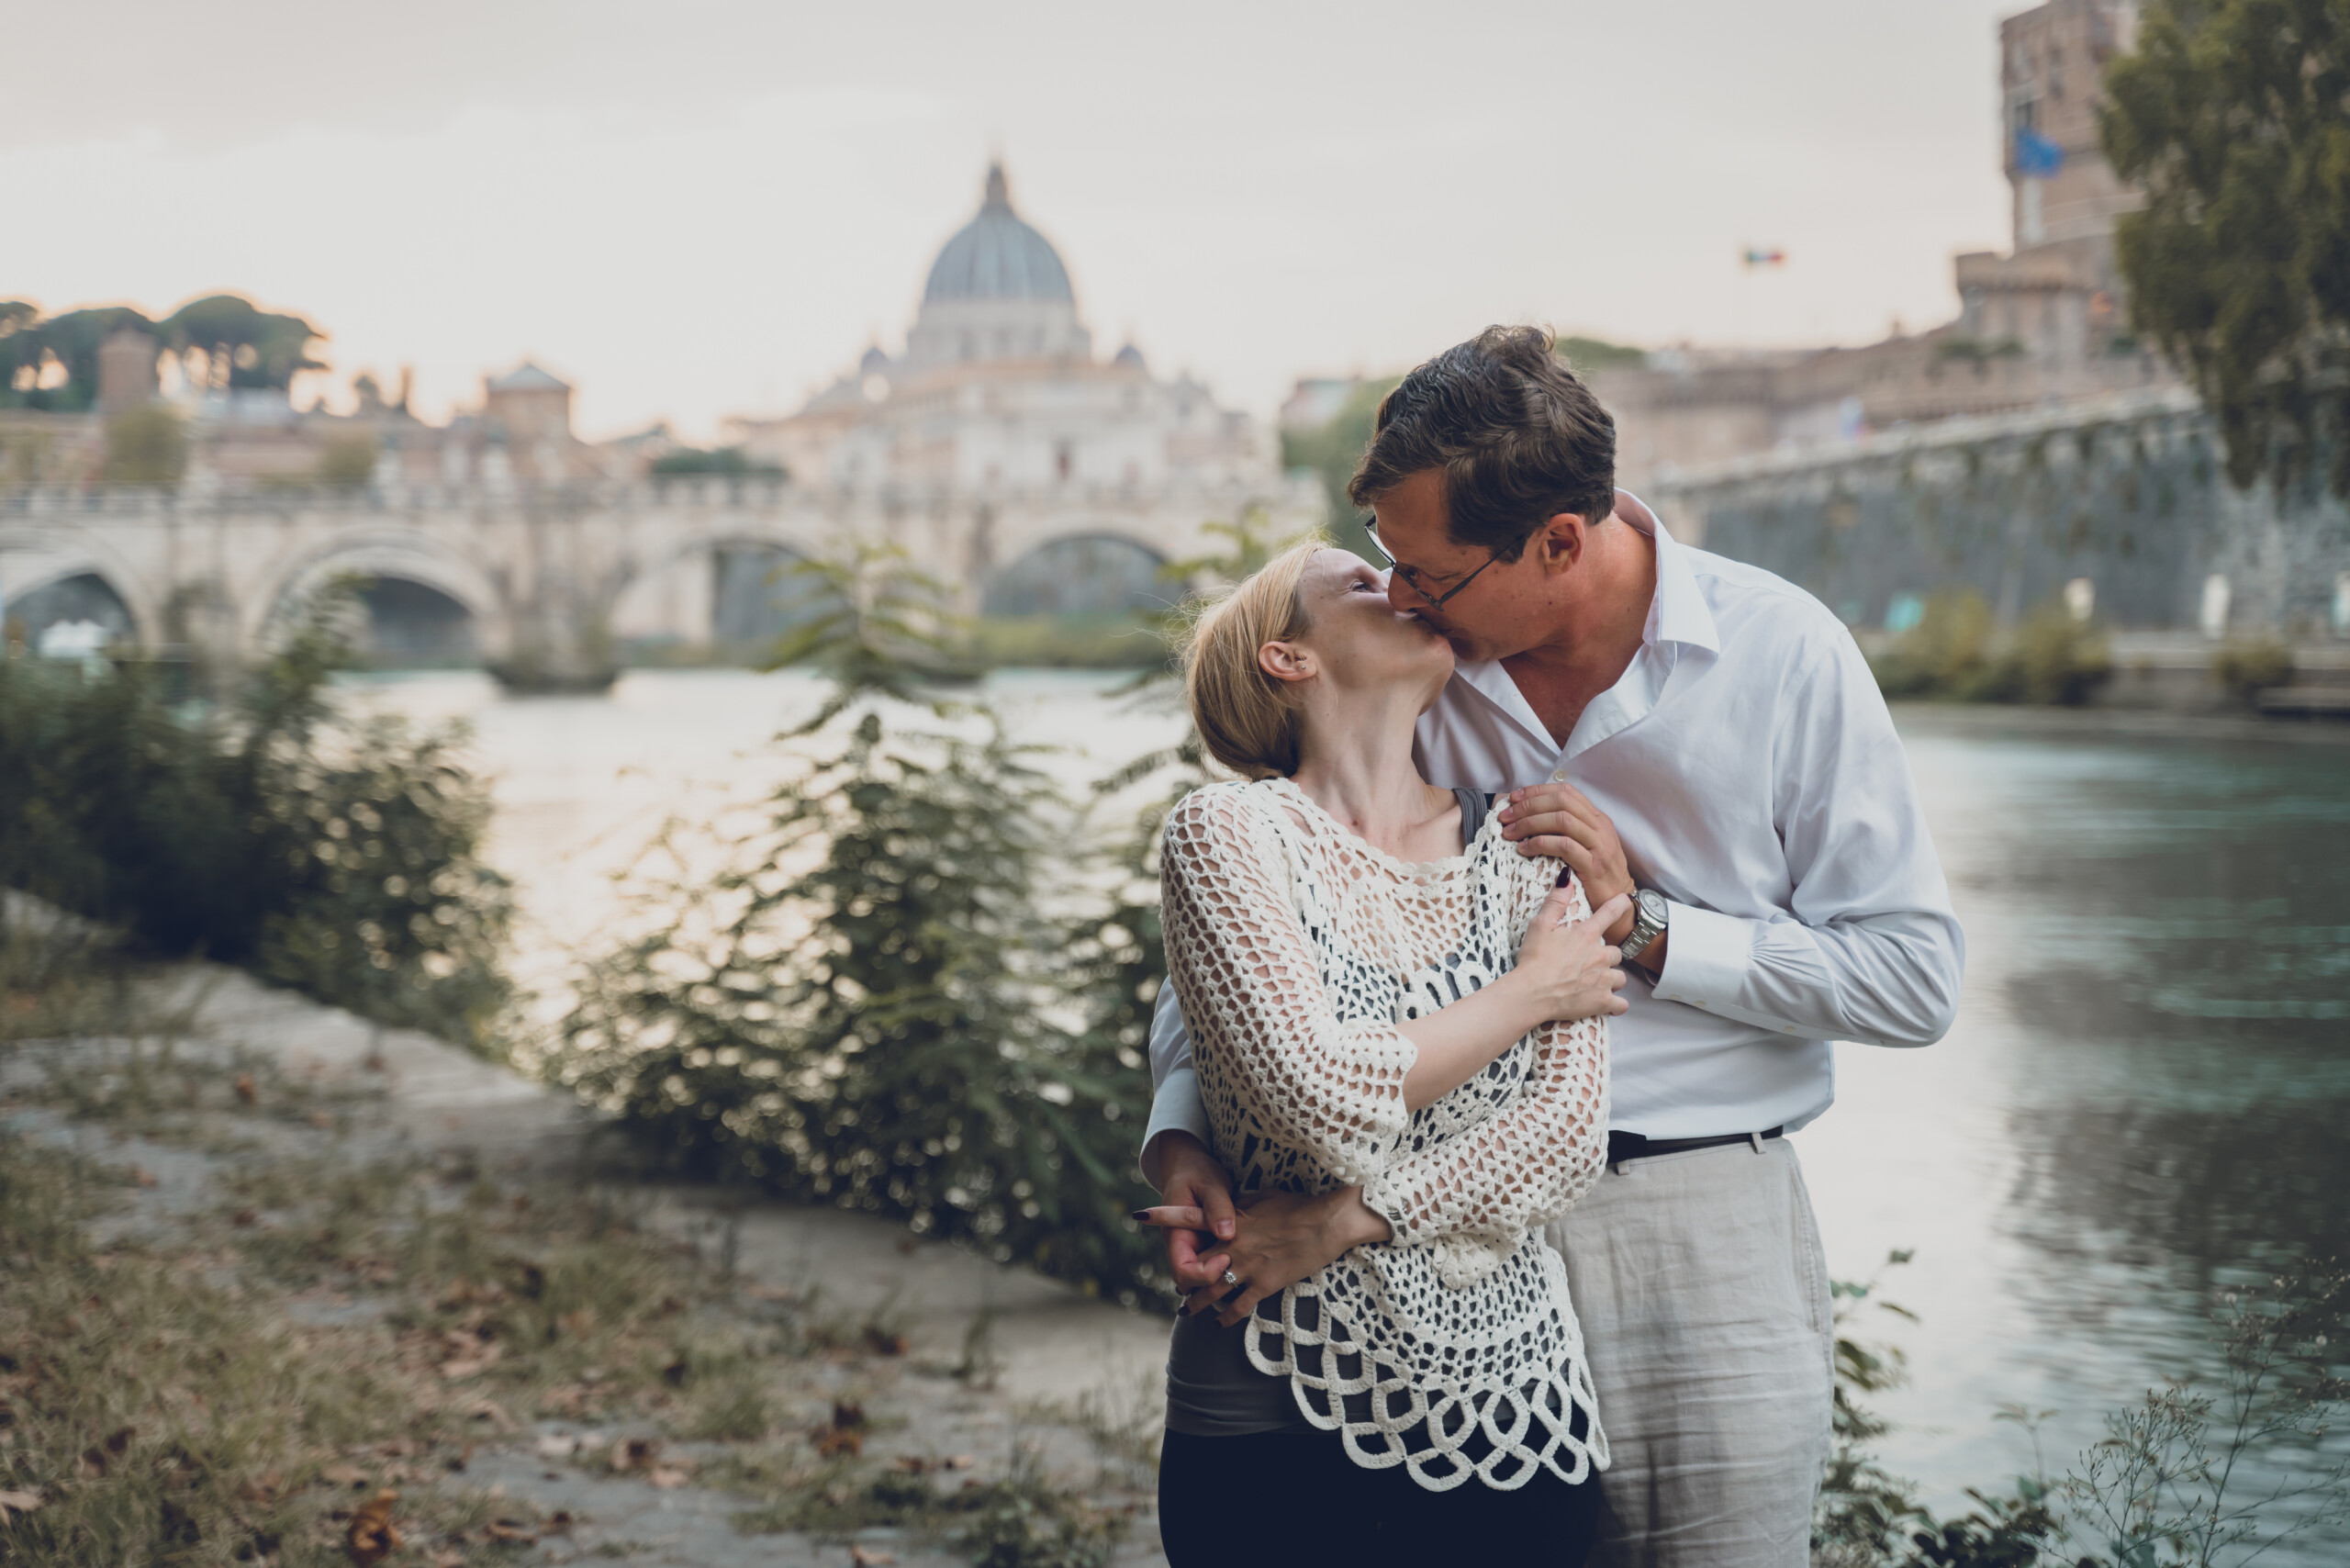 Proposal photoshoot in Rome